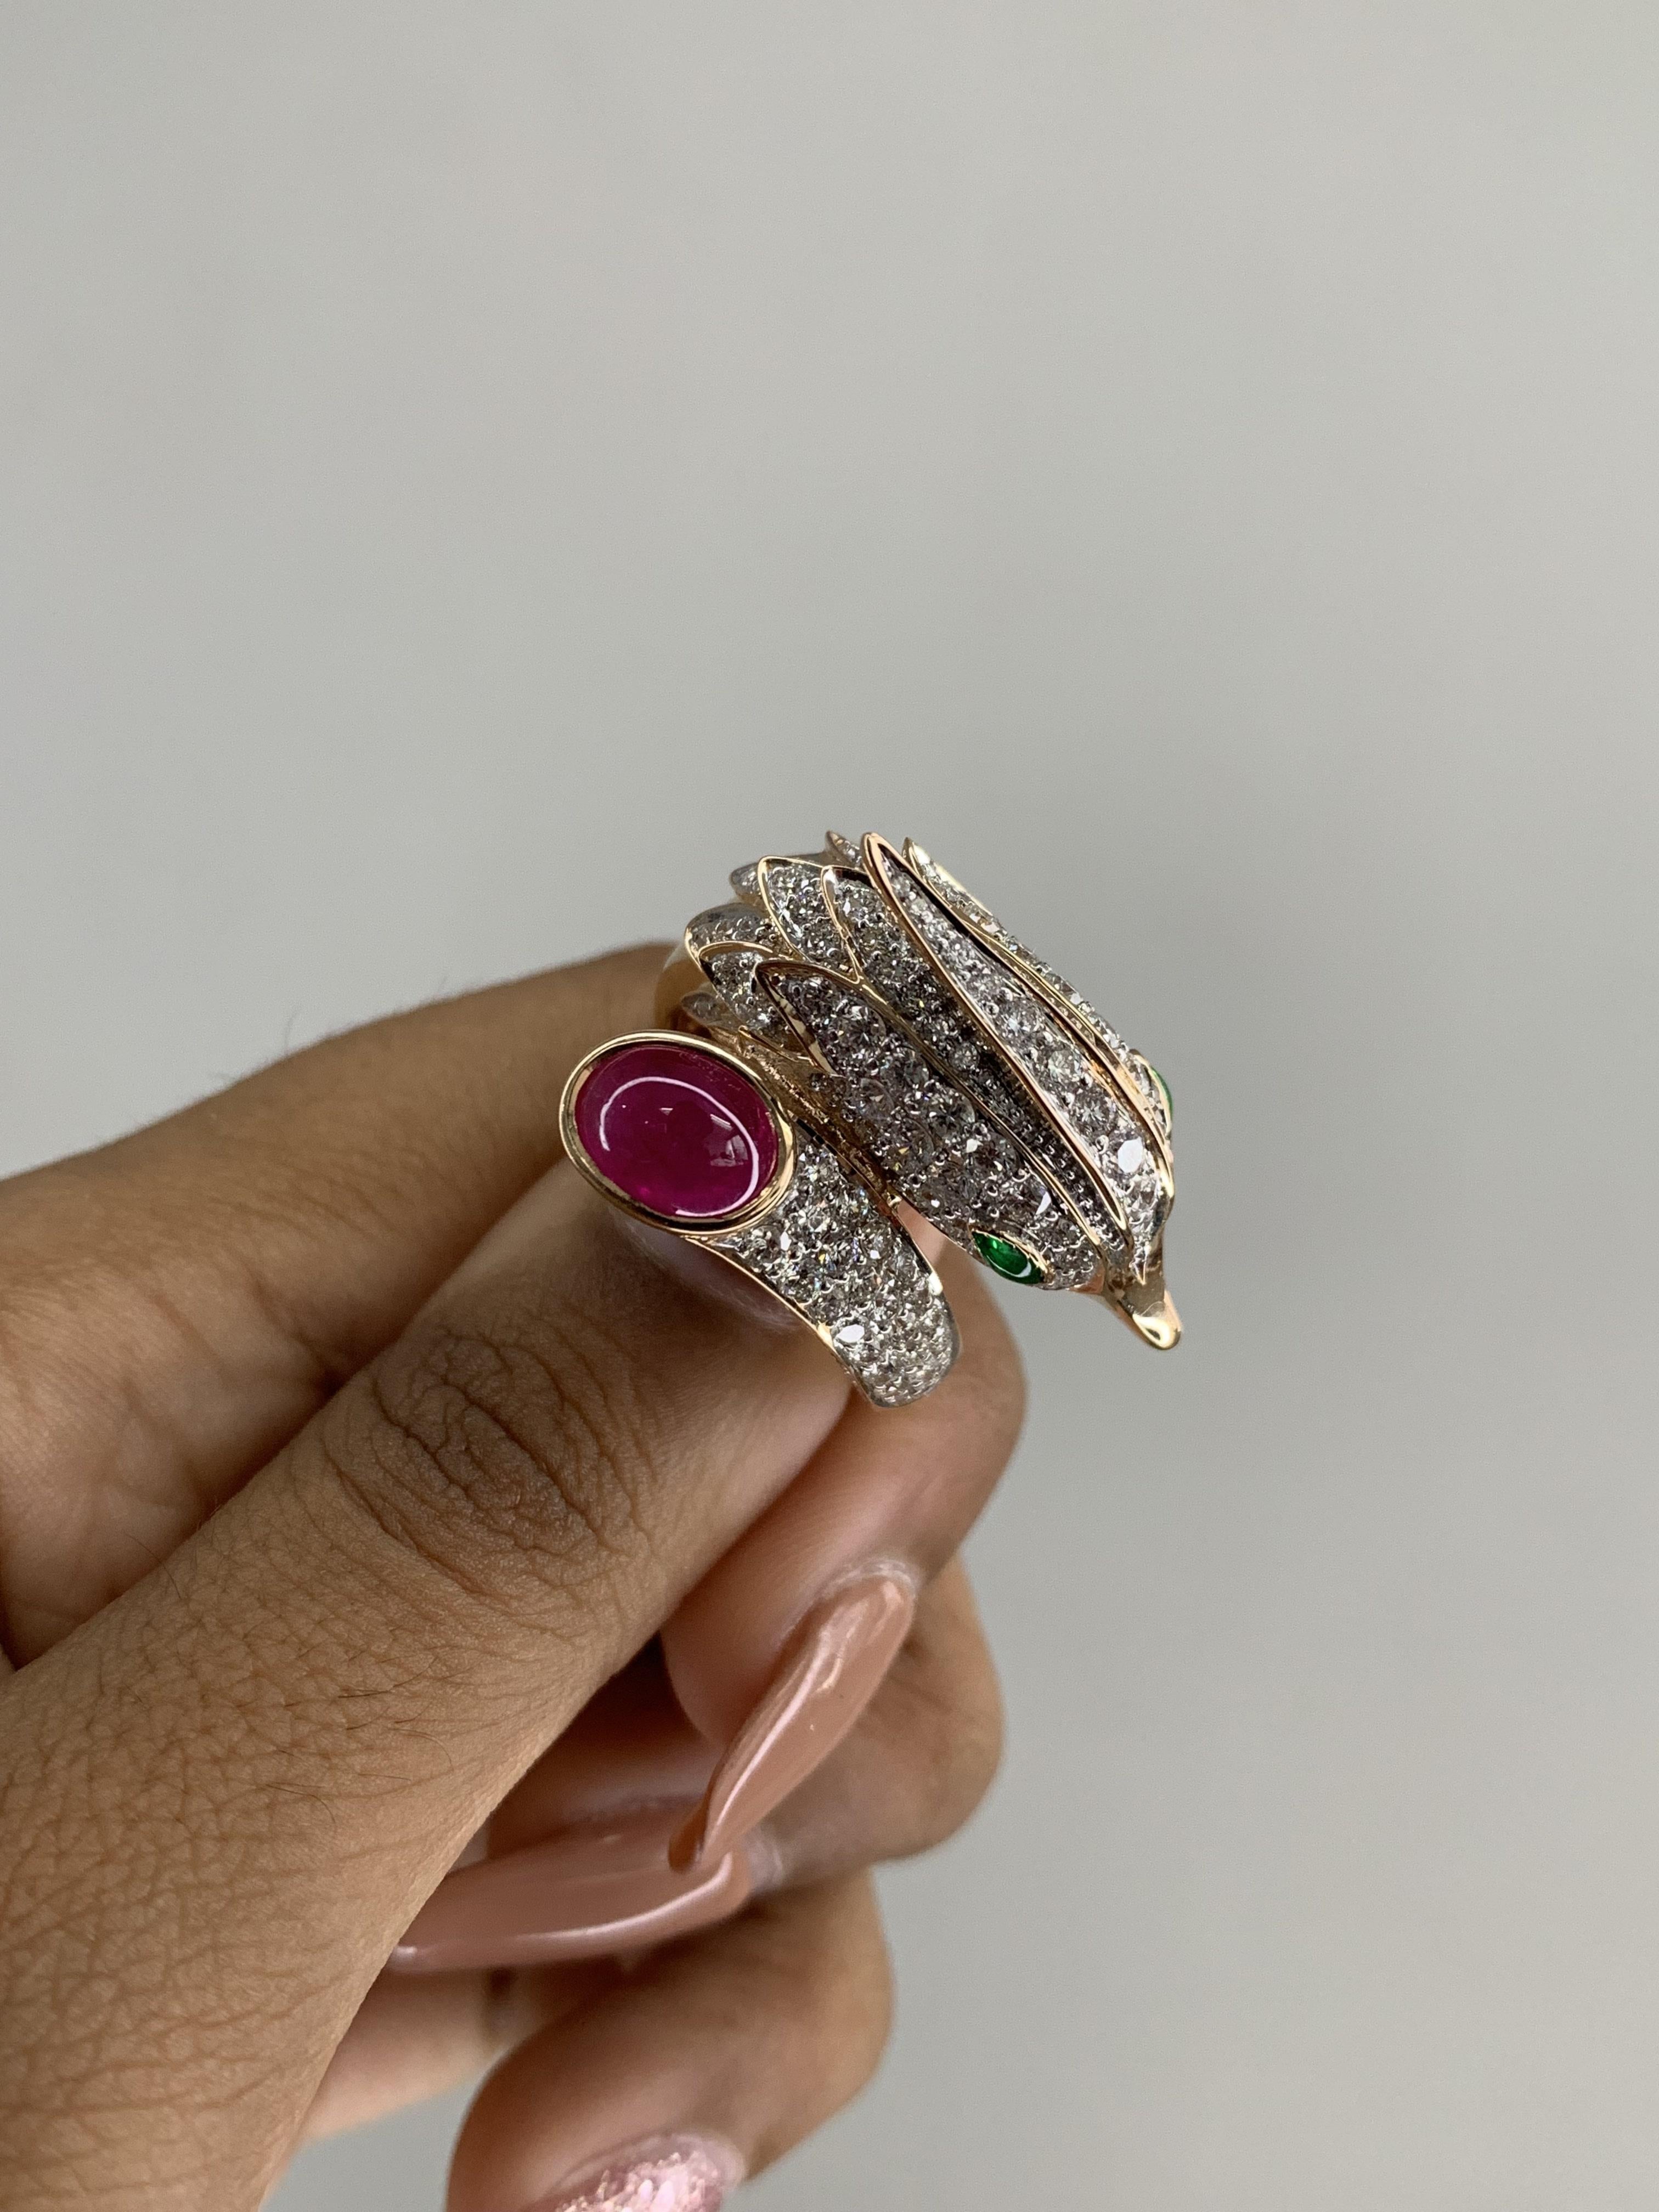 Women's or Men's Peacock Inspired 18K Gold Statement Ring with Diamonds and 1.96 Ct Ruby Cabochon